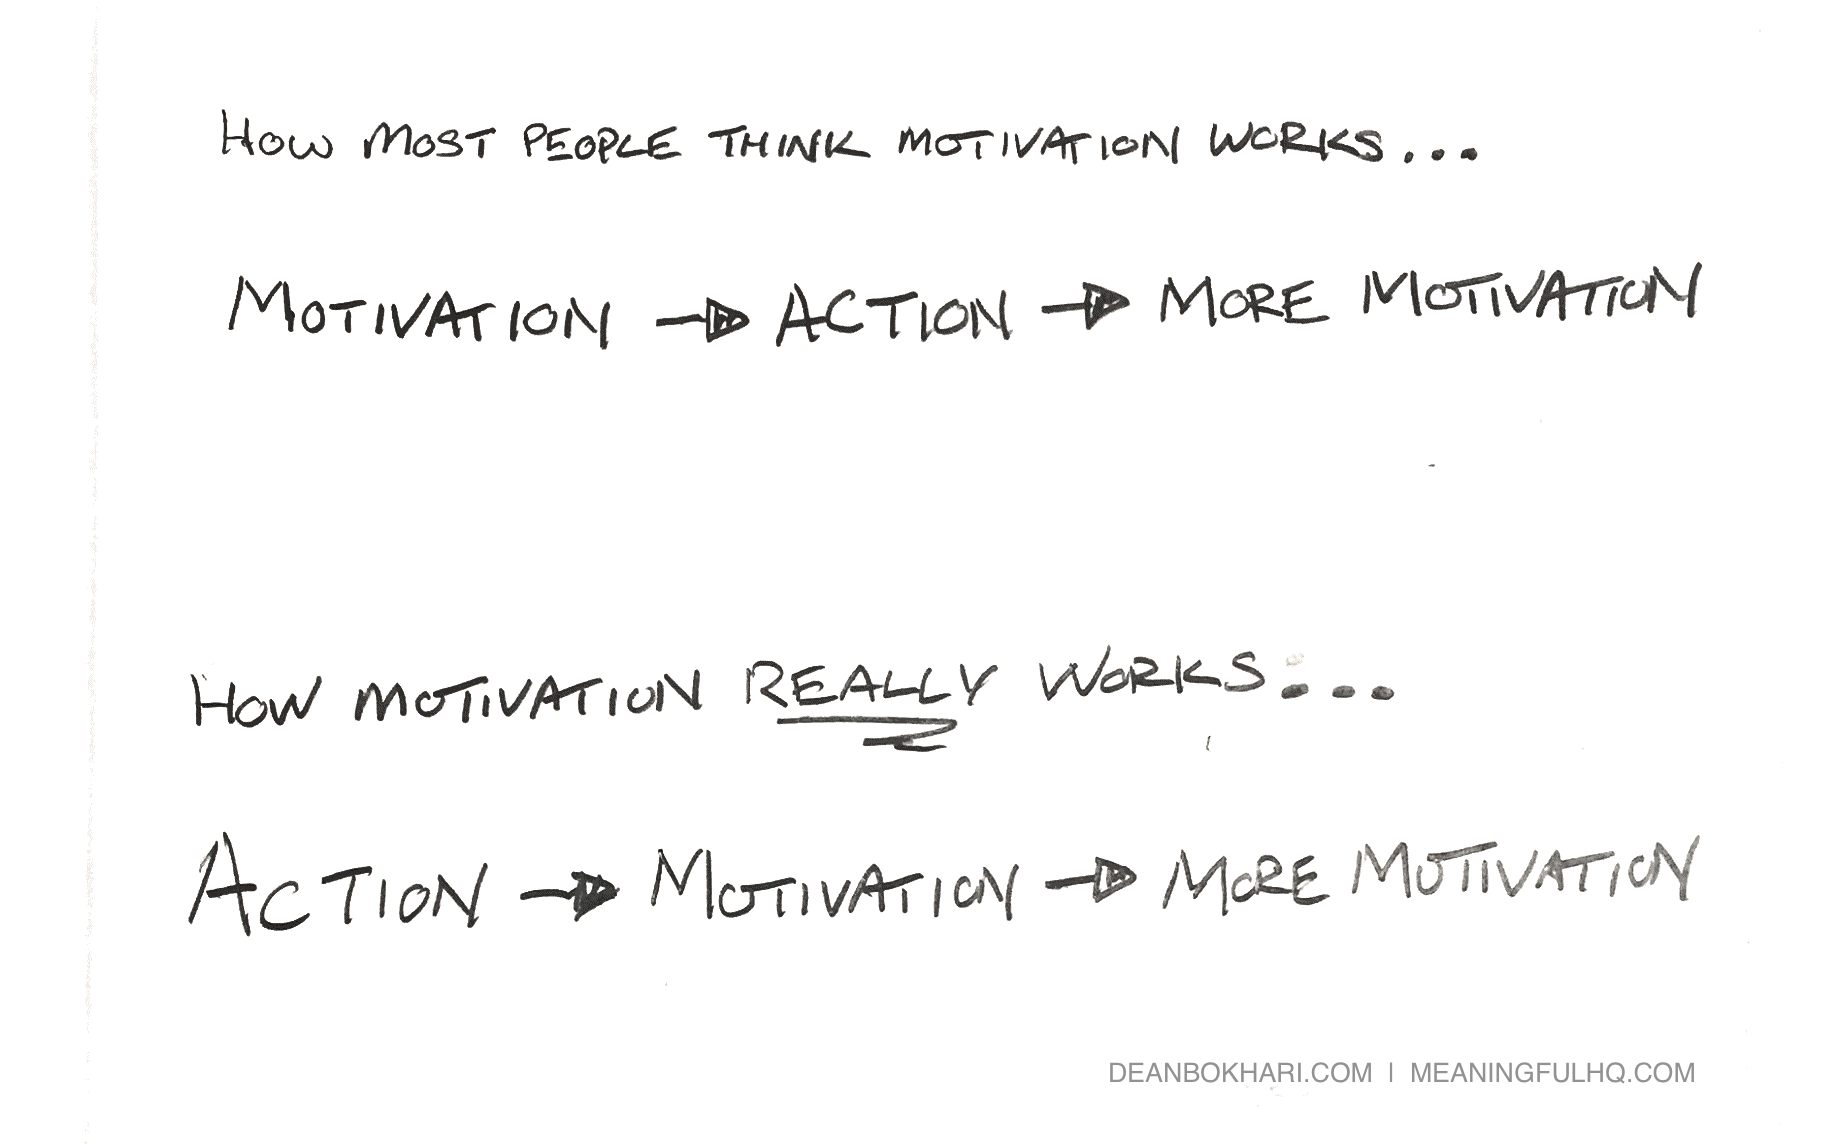 Action-Leads-to-Motivation